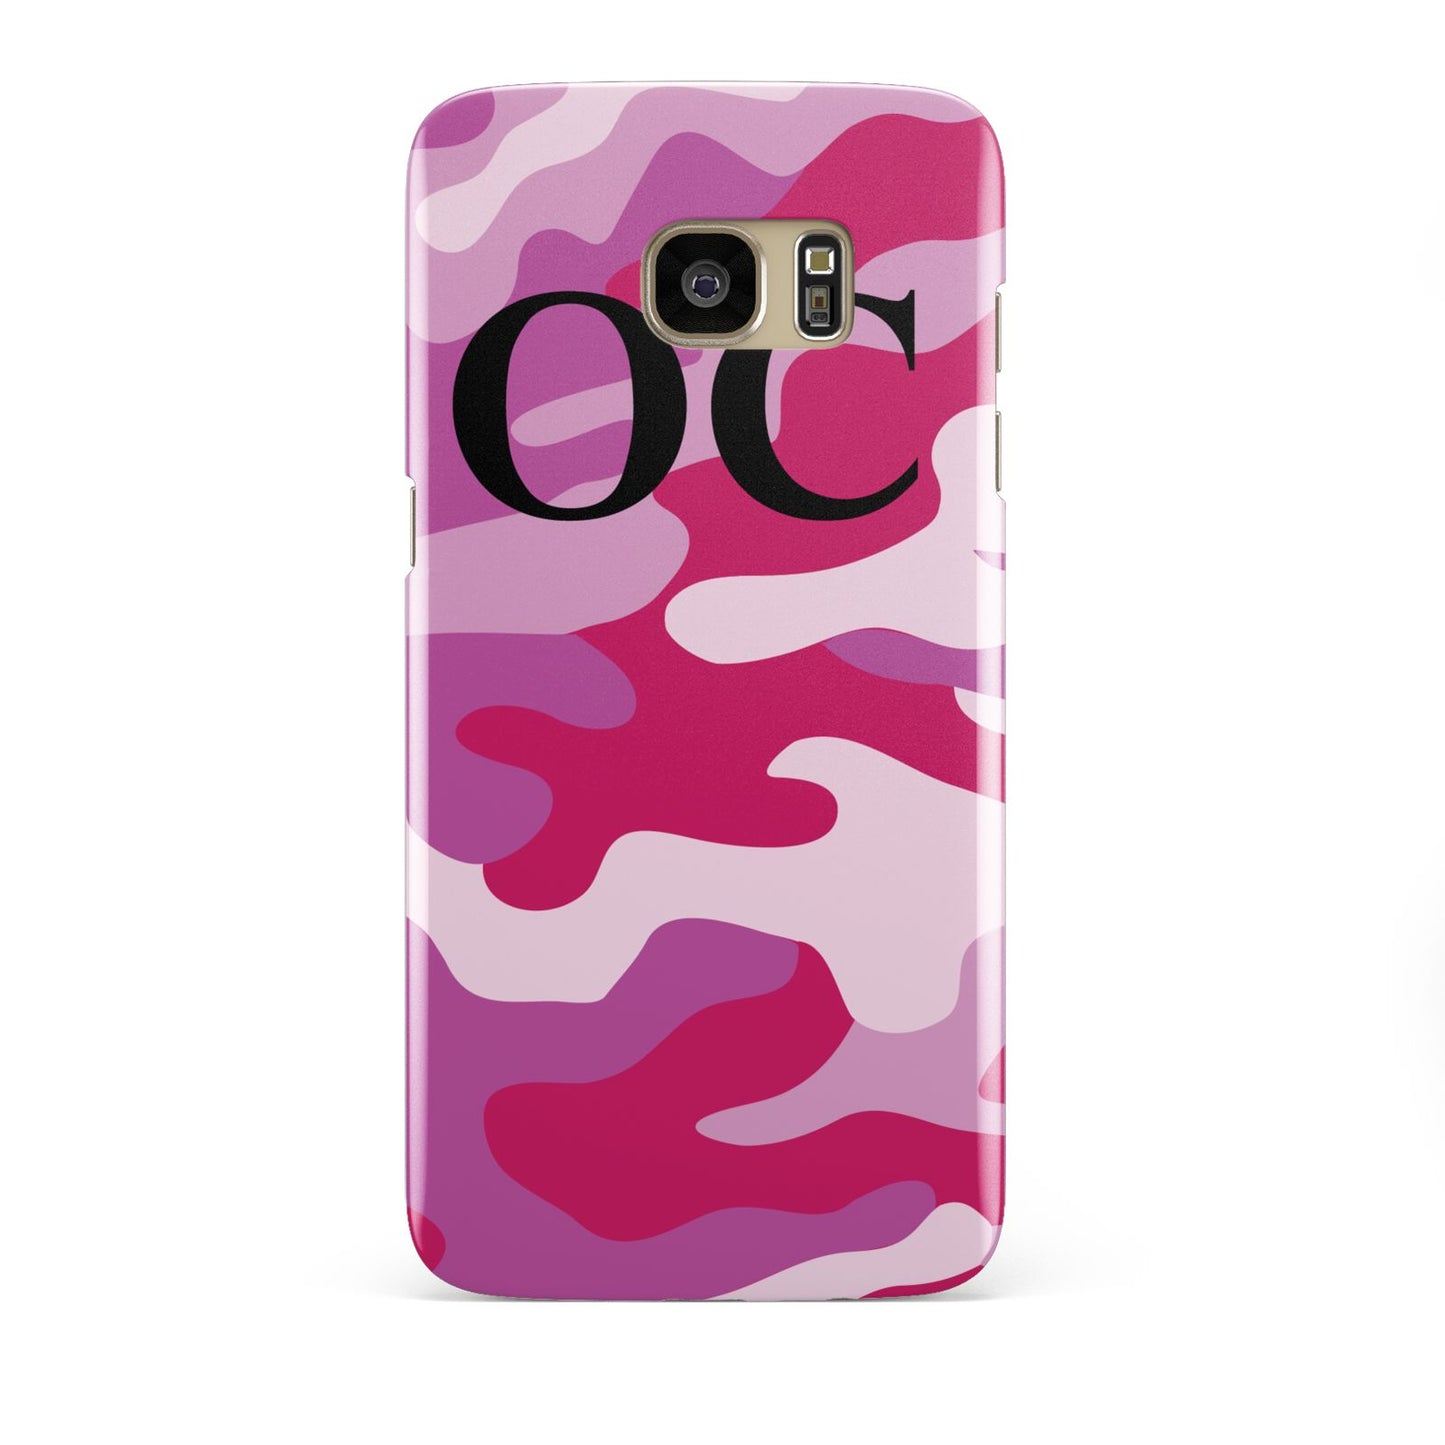 Camouflage Personalised Samsung Galaxy S7 Edge Case